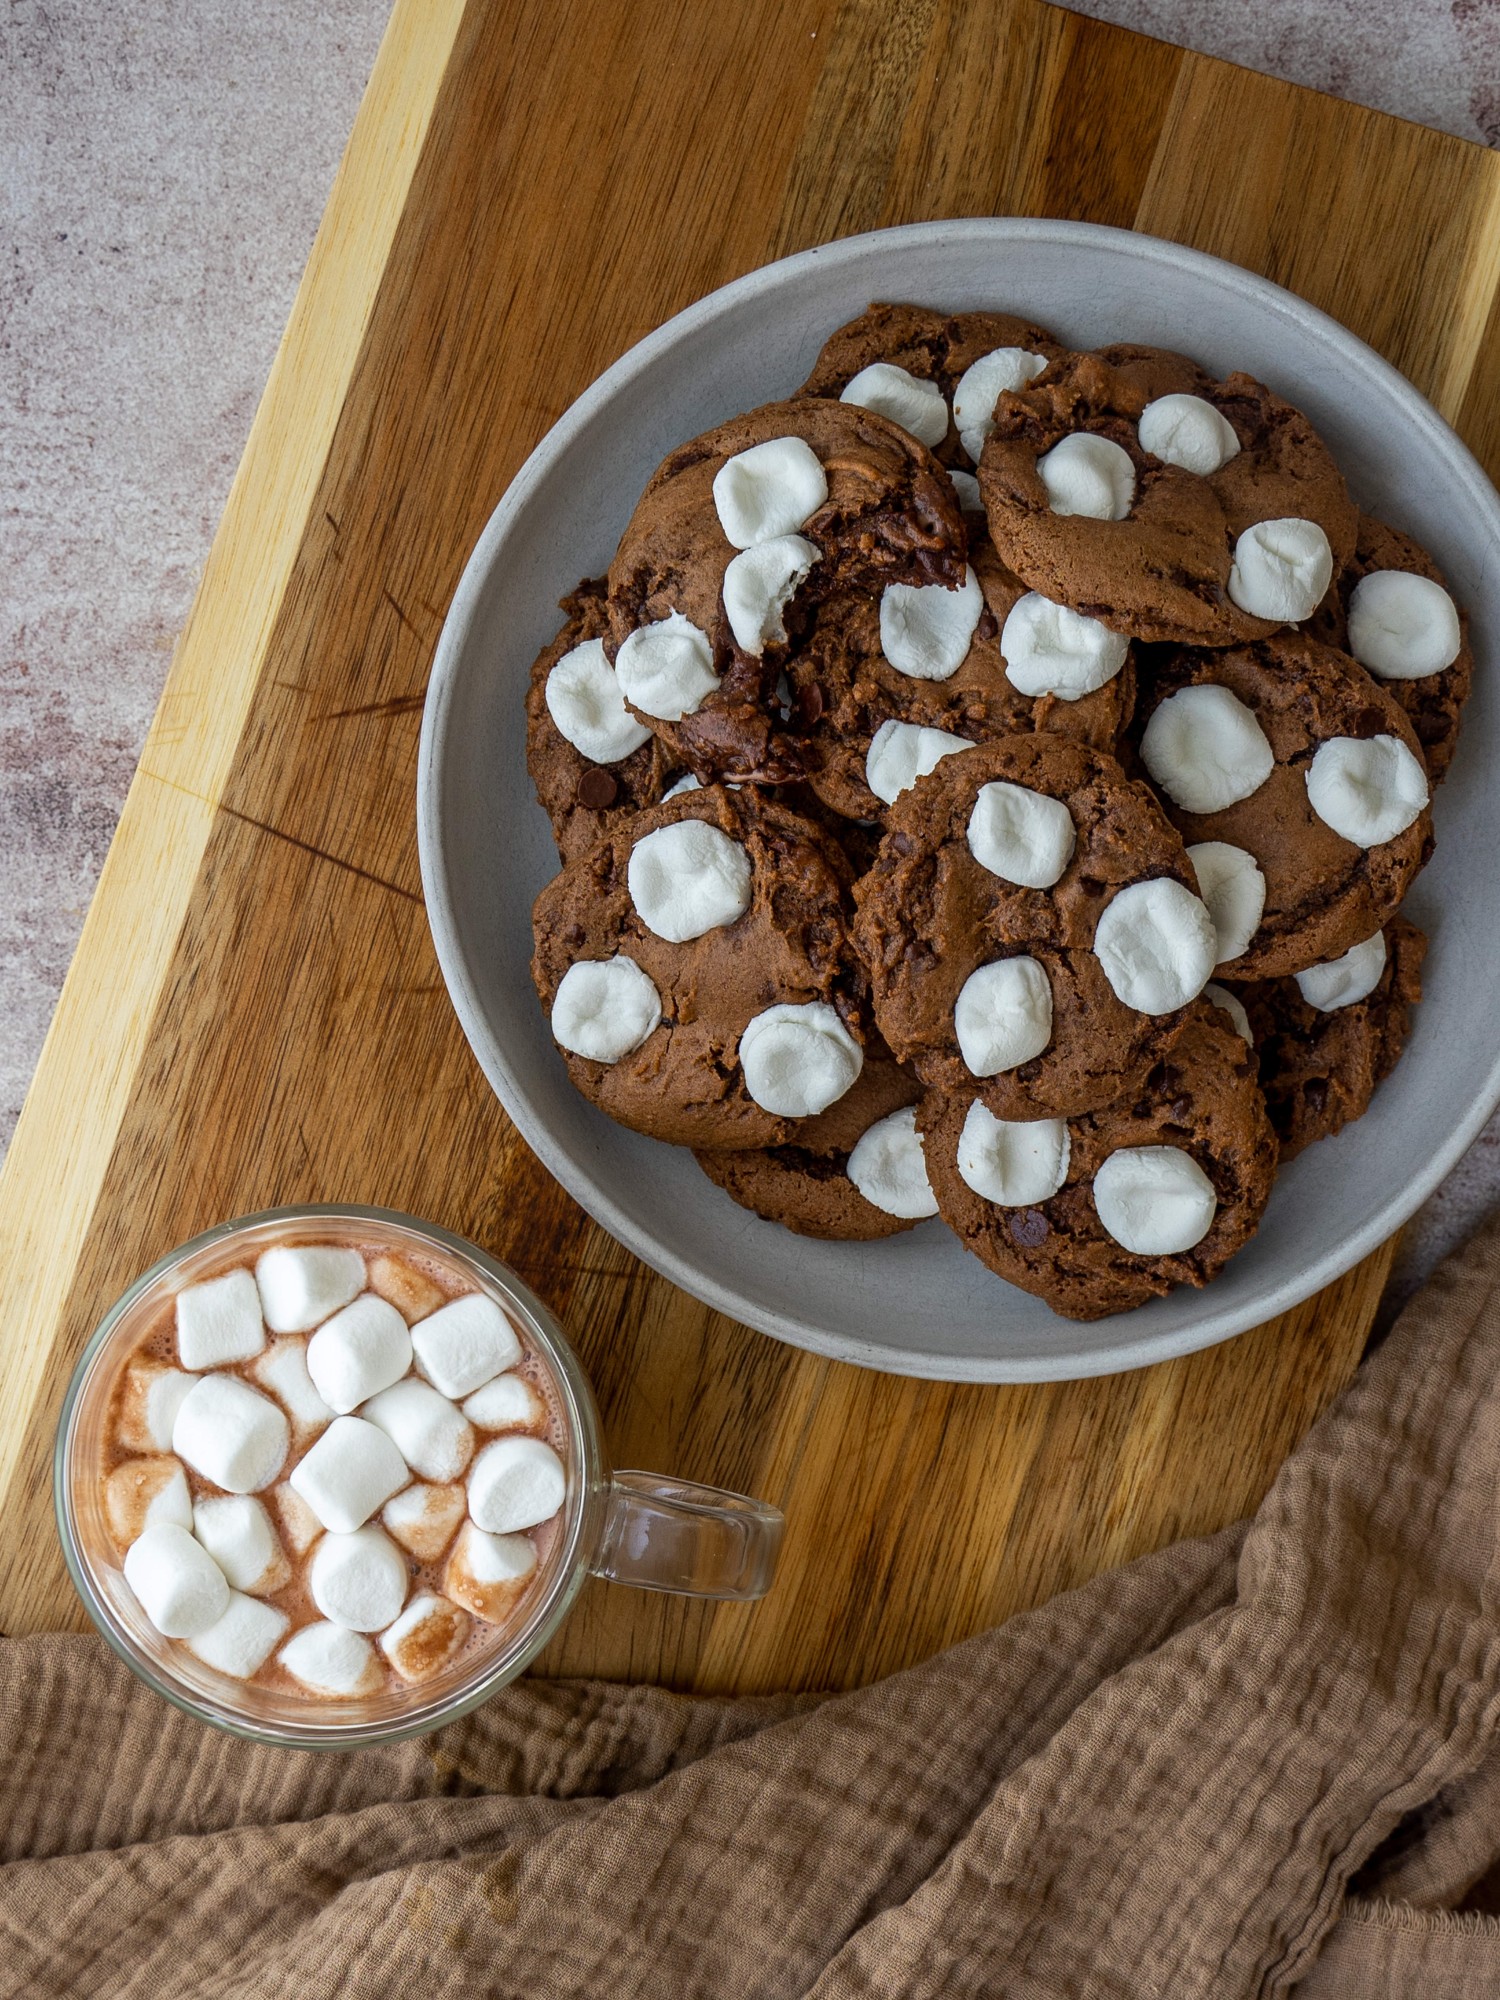 Hot cocoa cookie recipe next to a cup of hot chocolate